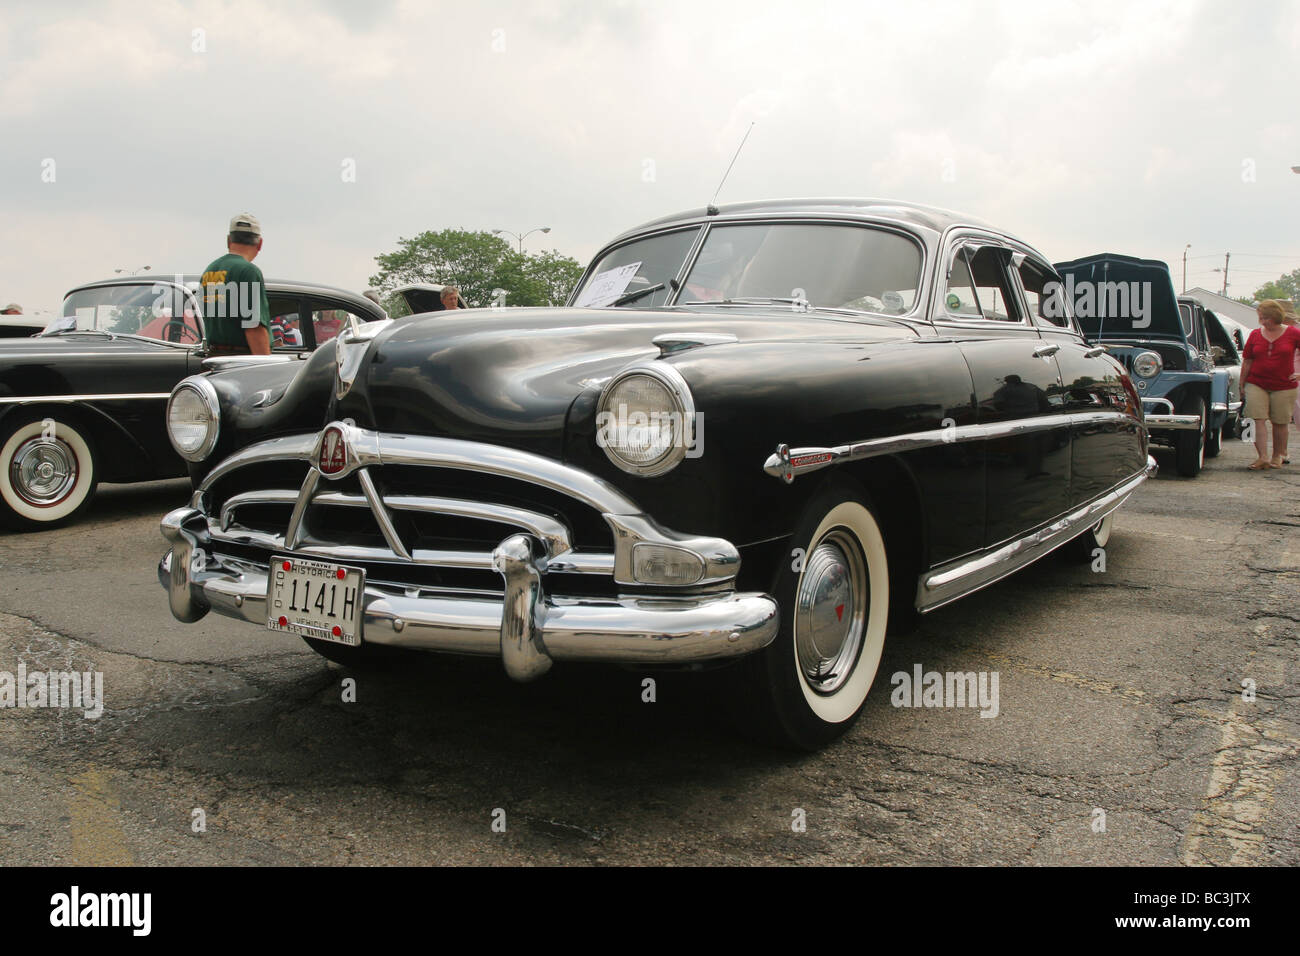 Auto 1952 Hudson Commodore 8 with 4 Doors Car Show at Hamilton Ohio Note paper on front window Stock Photo